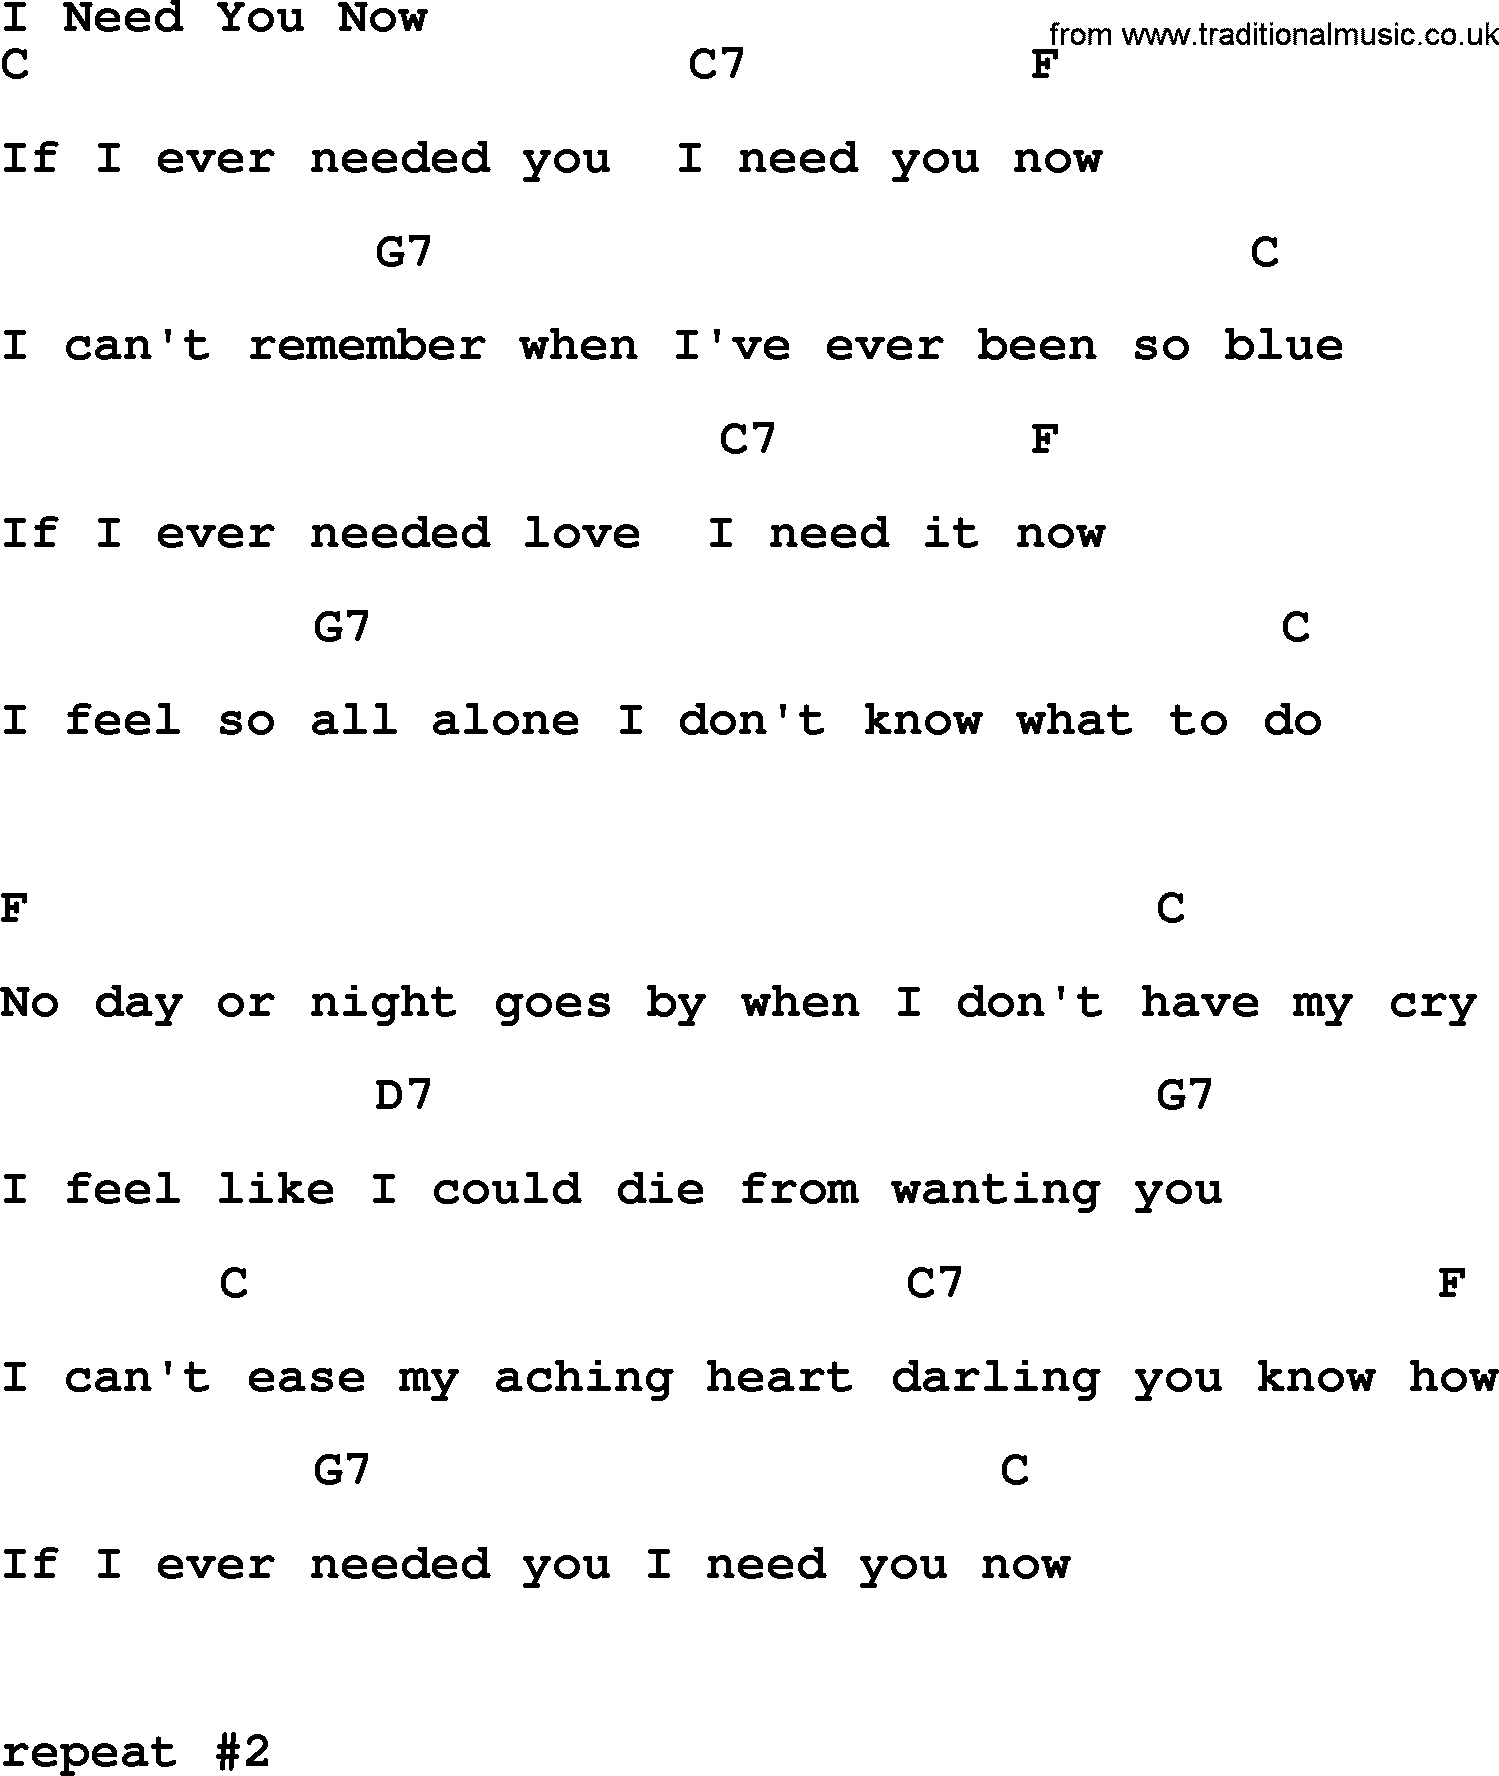 Bluegrass song: I Need You Now, lyrics and chords